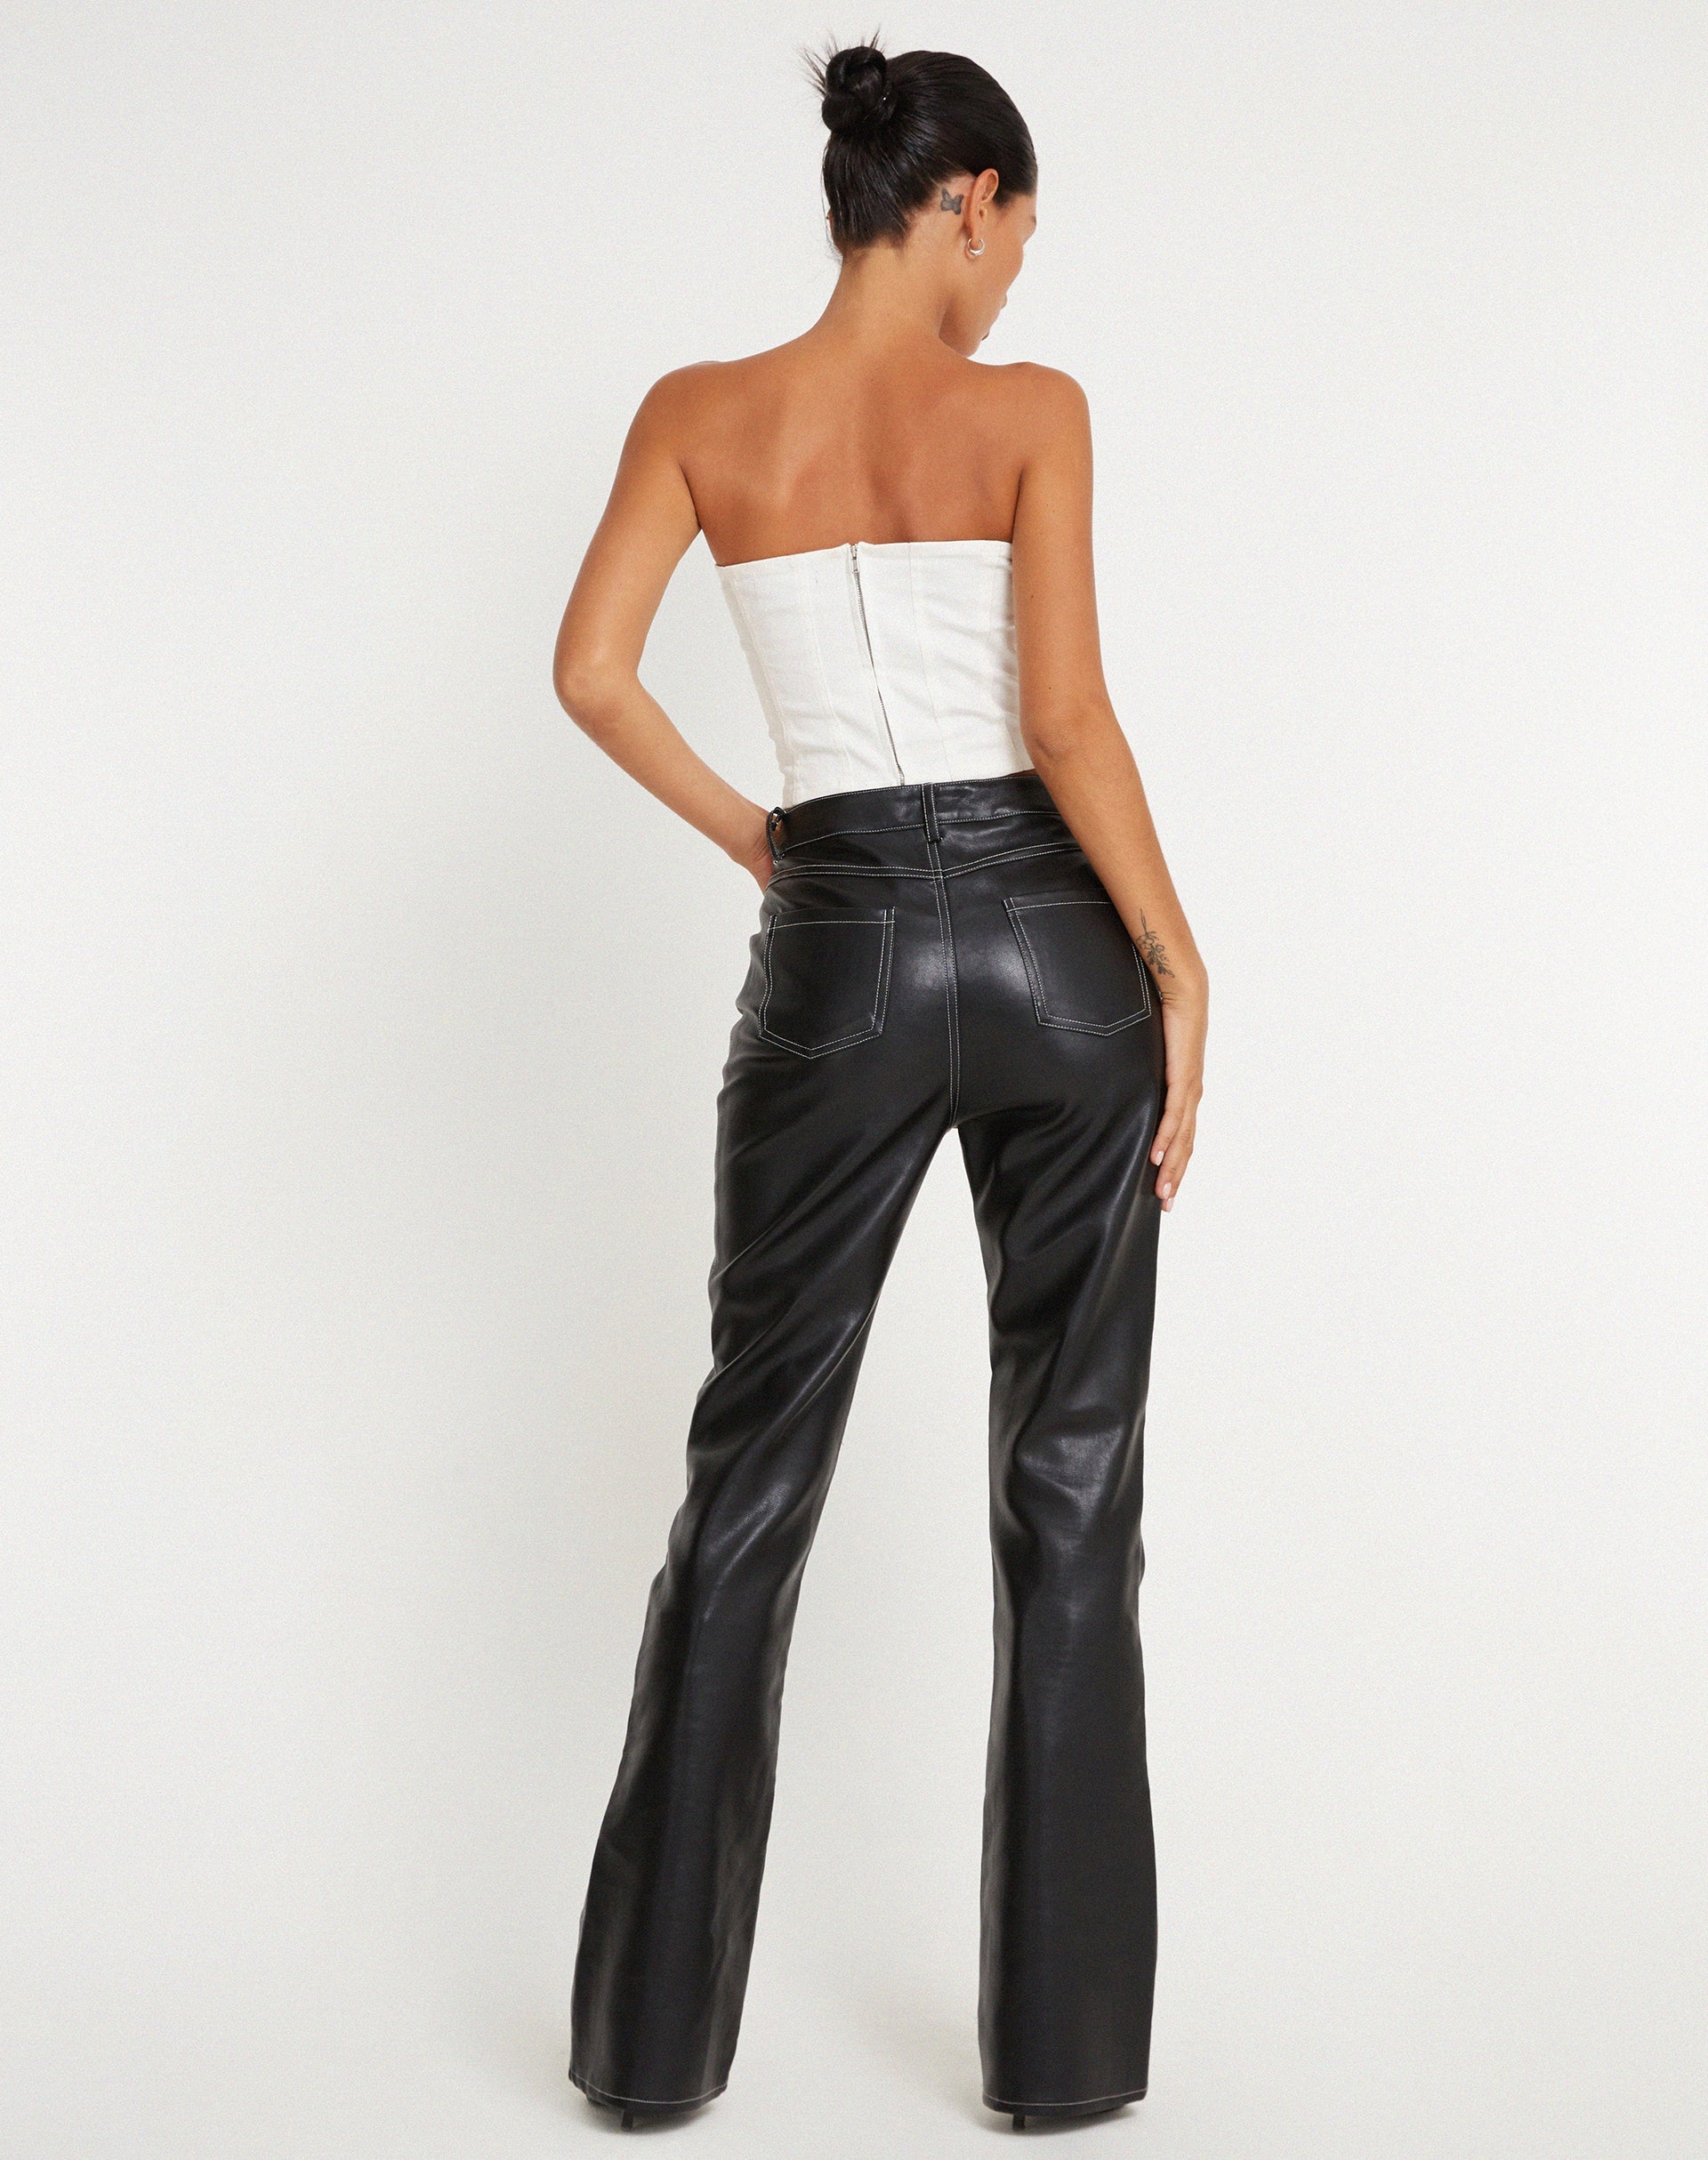 Image of Zorea Trouser in PU Black with White Stitching